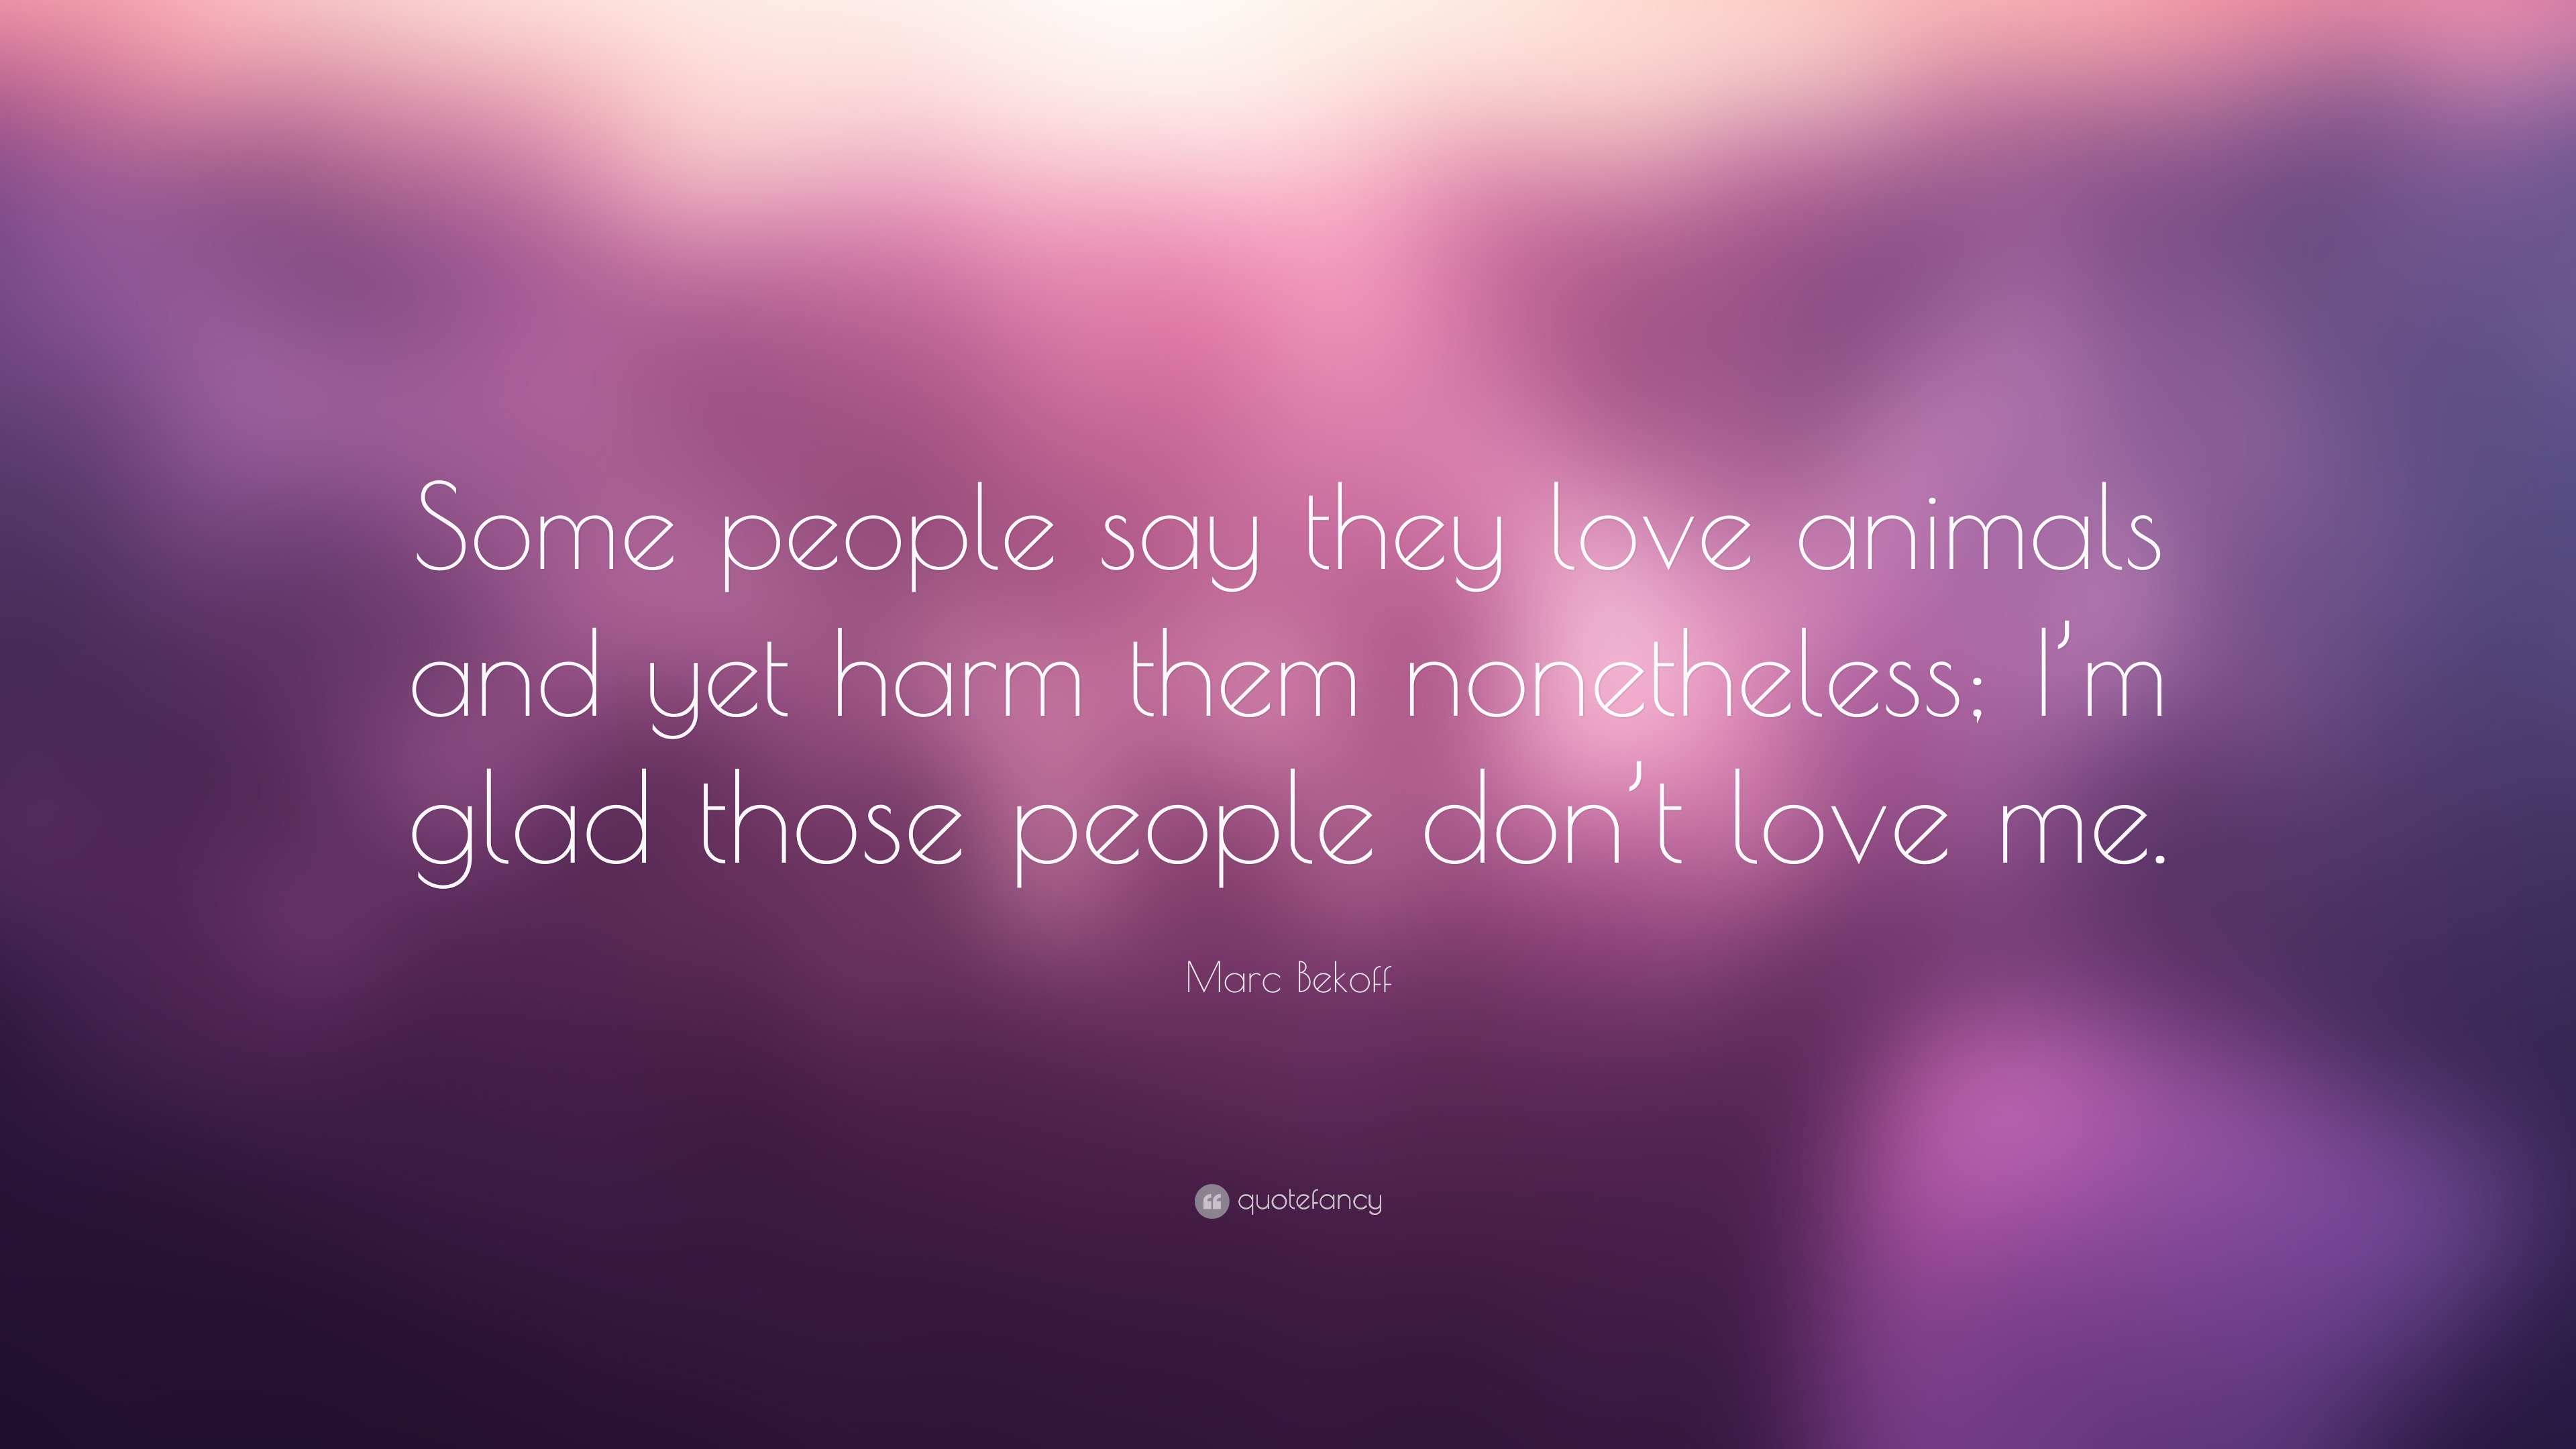 Marc Bekoff Quote: “Some people say they love animals and yet harm them  nonetheless; I'm